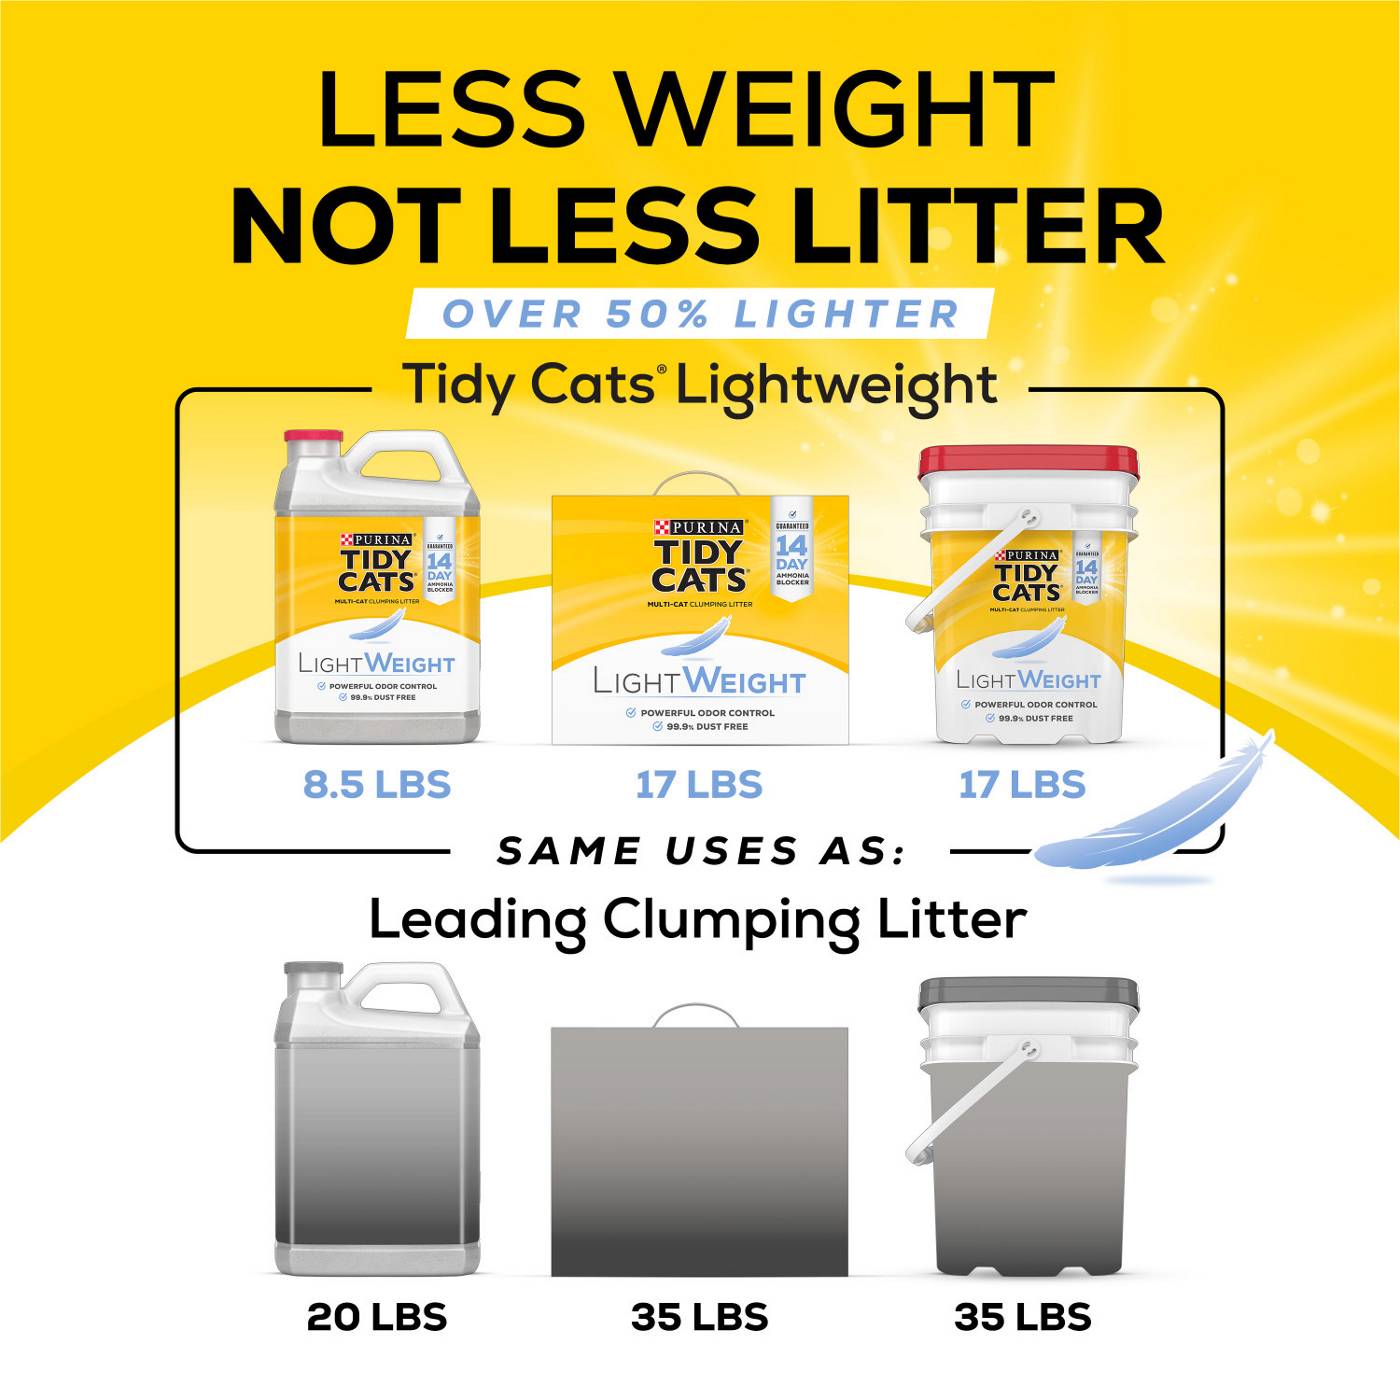 Tidy Cats Purina Tidy Cats Light Weight, Low Dust, Clumping Cat Litter 24/7 Performance Multi Cat Litter; image 6 of 7